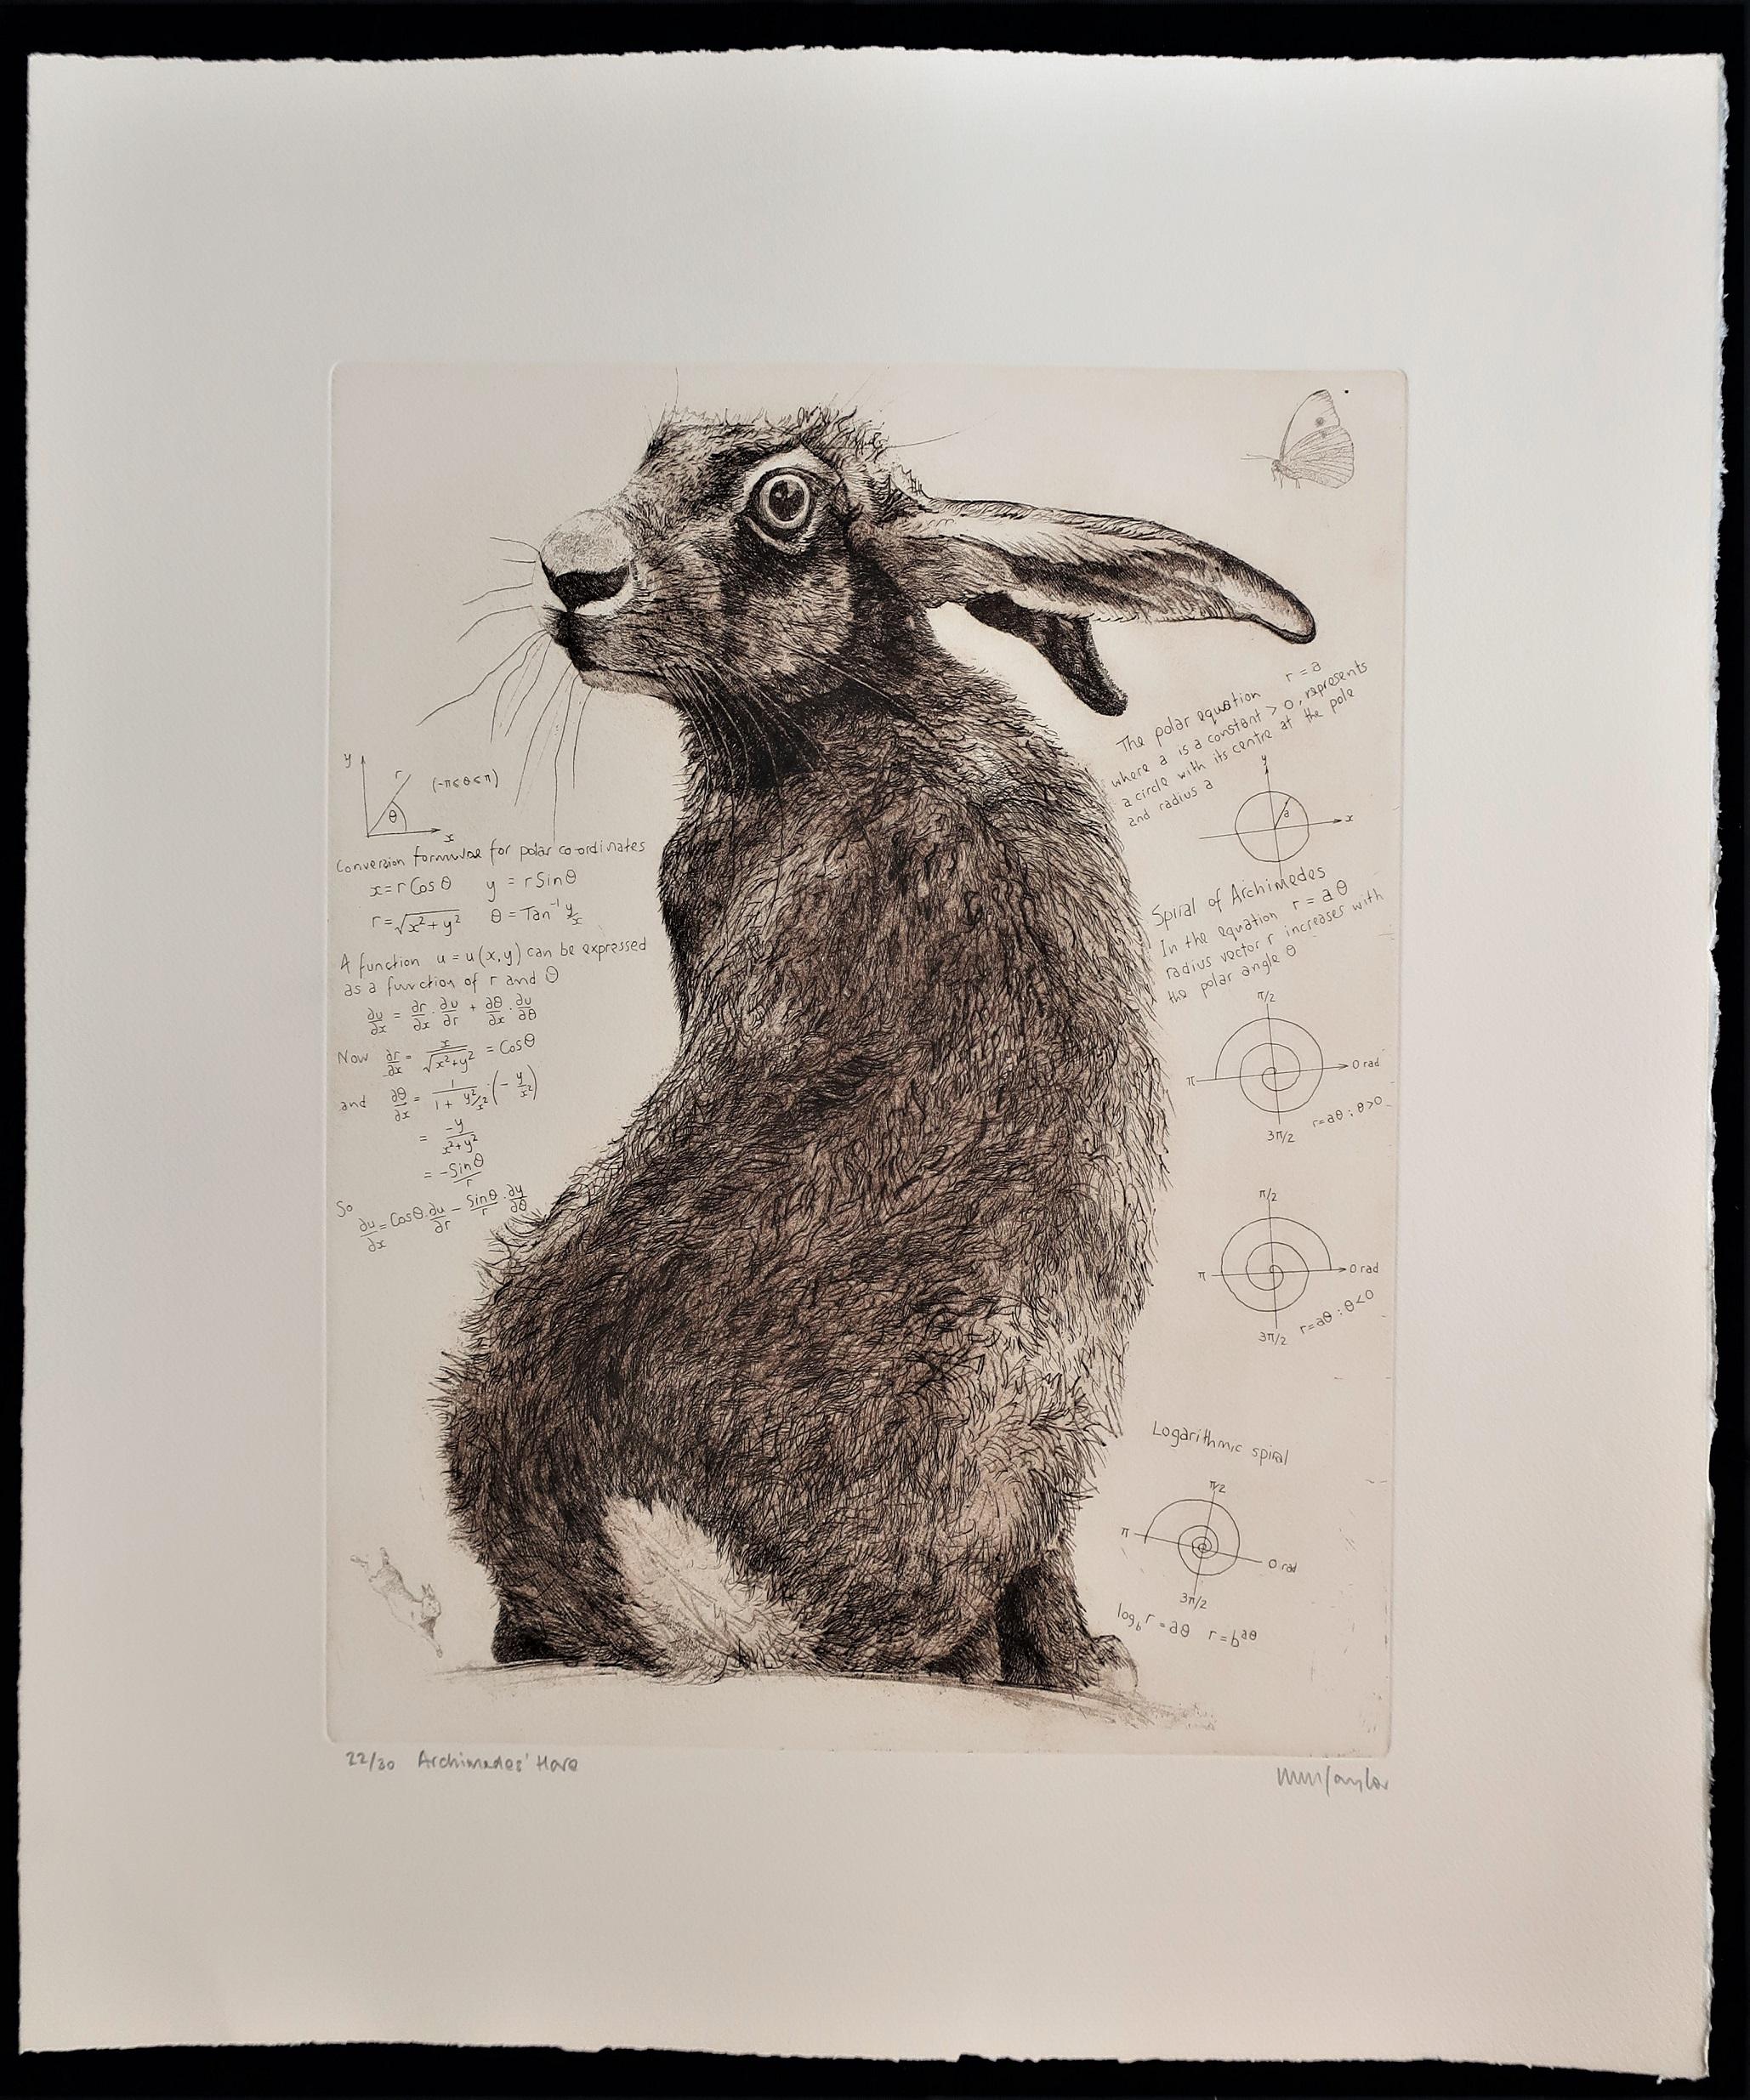 Will Taylor, Archimedes’ Hare, Animal Art, Affordable Art, Art Online For Sale 2